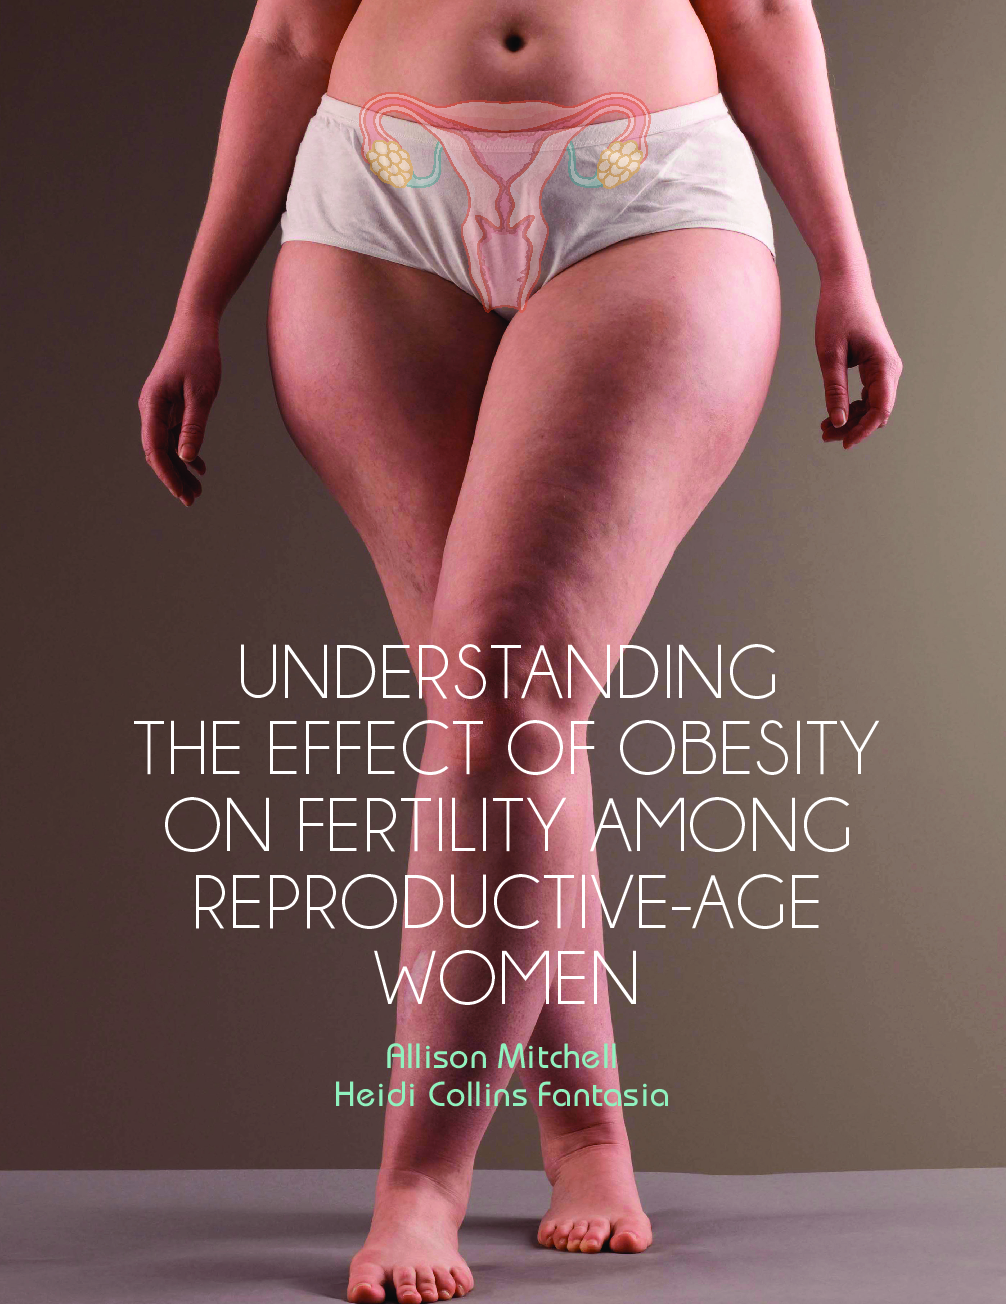 Understanding the Effect of Obesity on Fertility Among Reproductive-Age Women